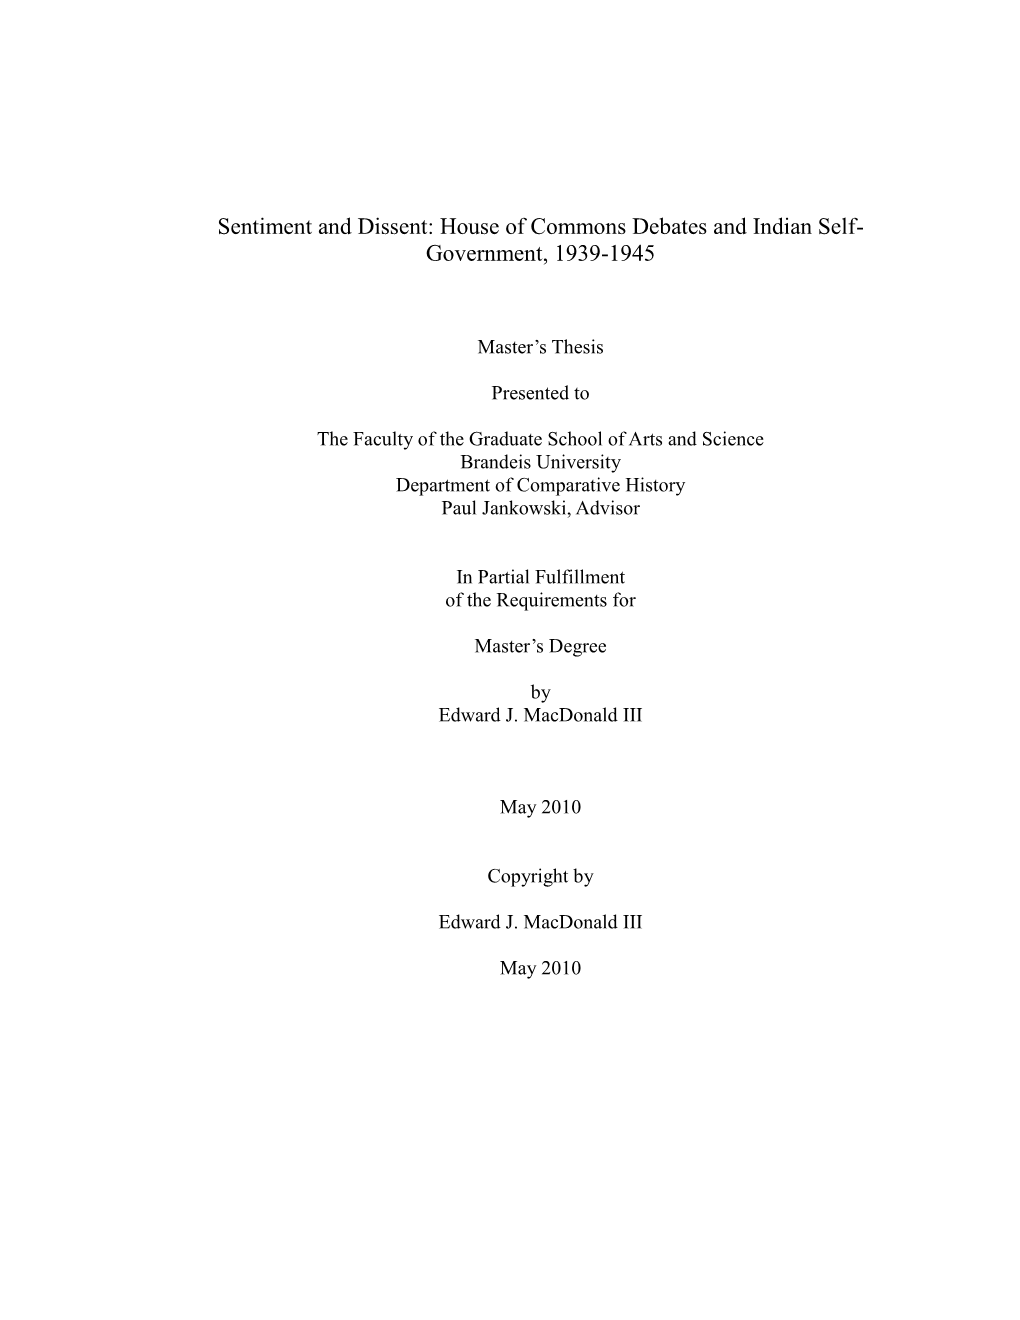 House of Commons Debates and Indian Self- Government, 1939-1945